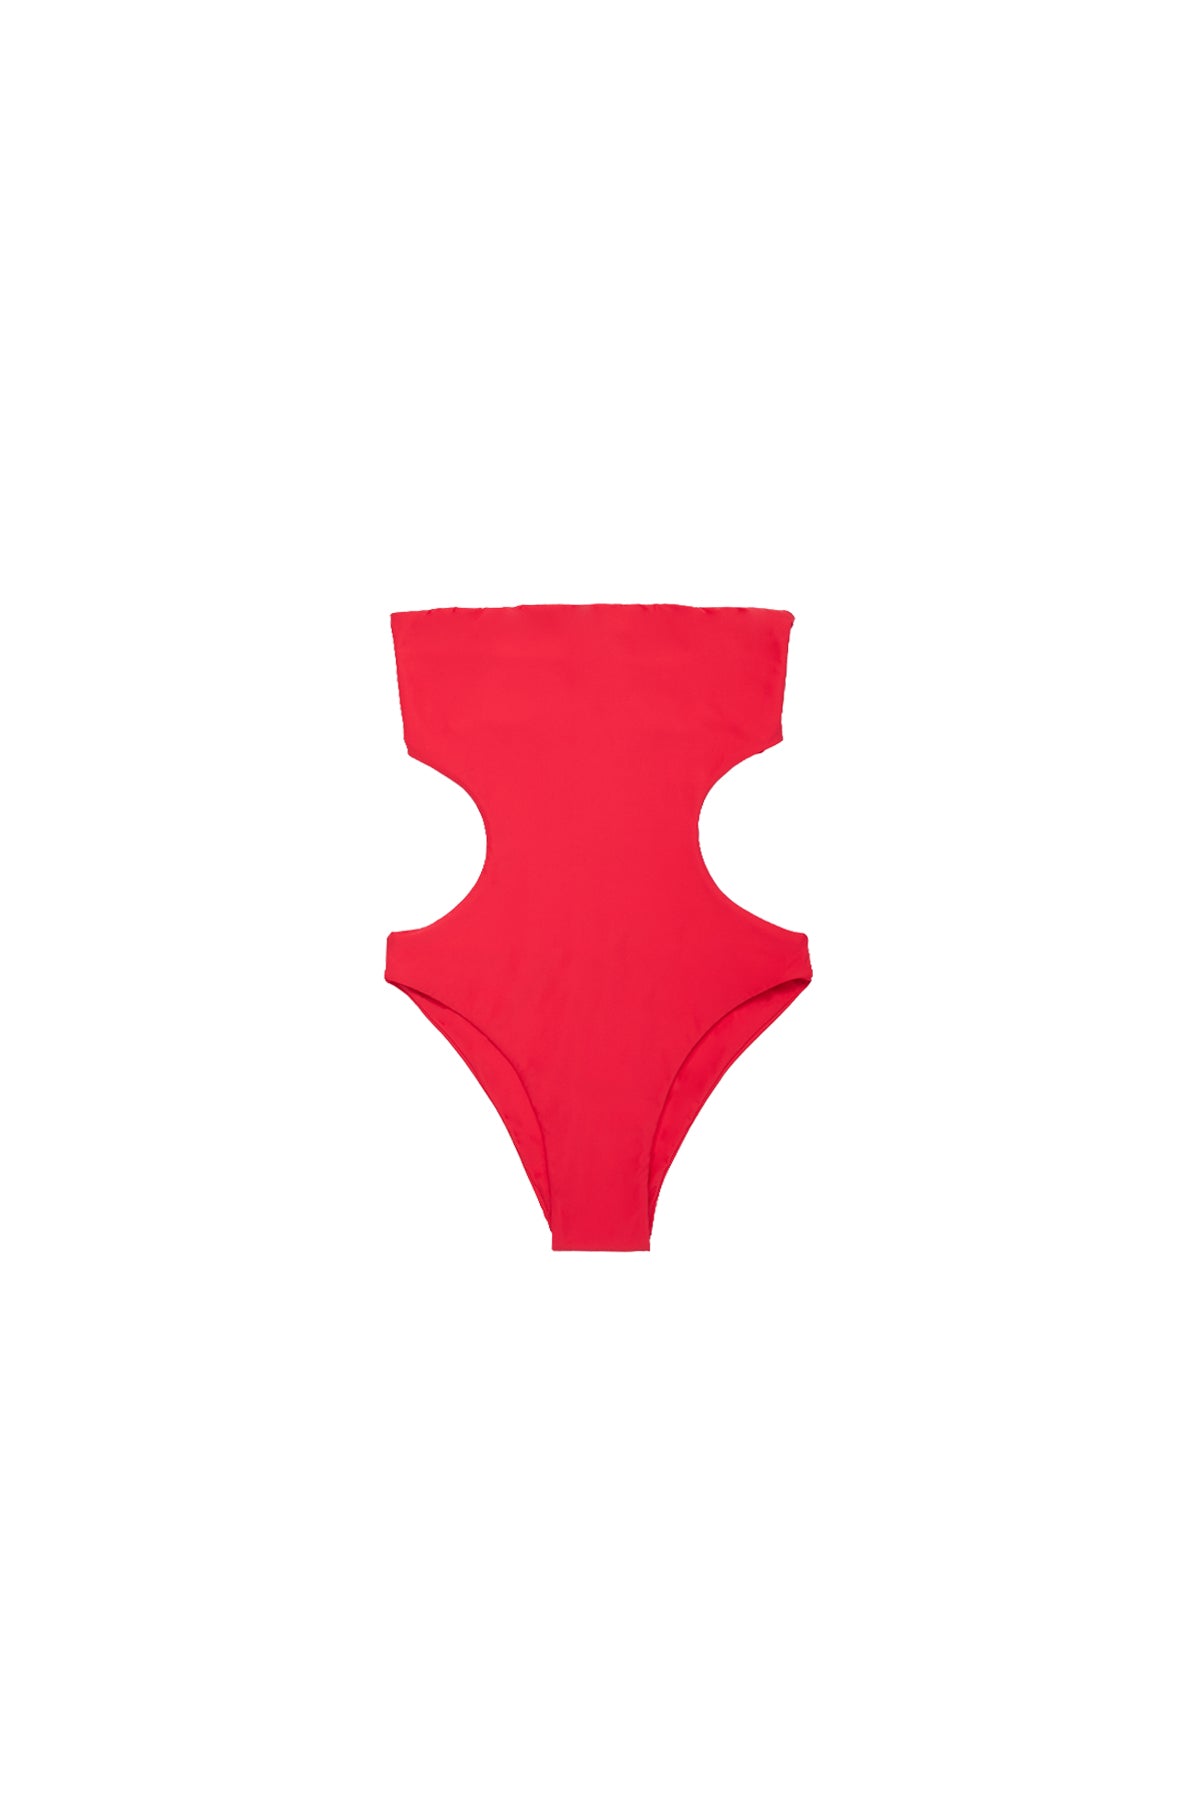 The Updated One Piece Red